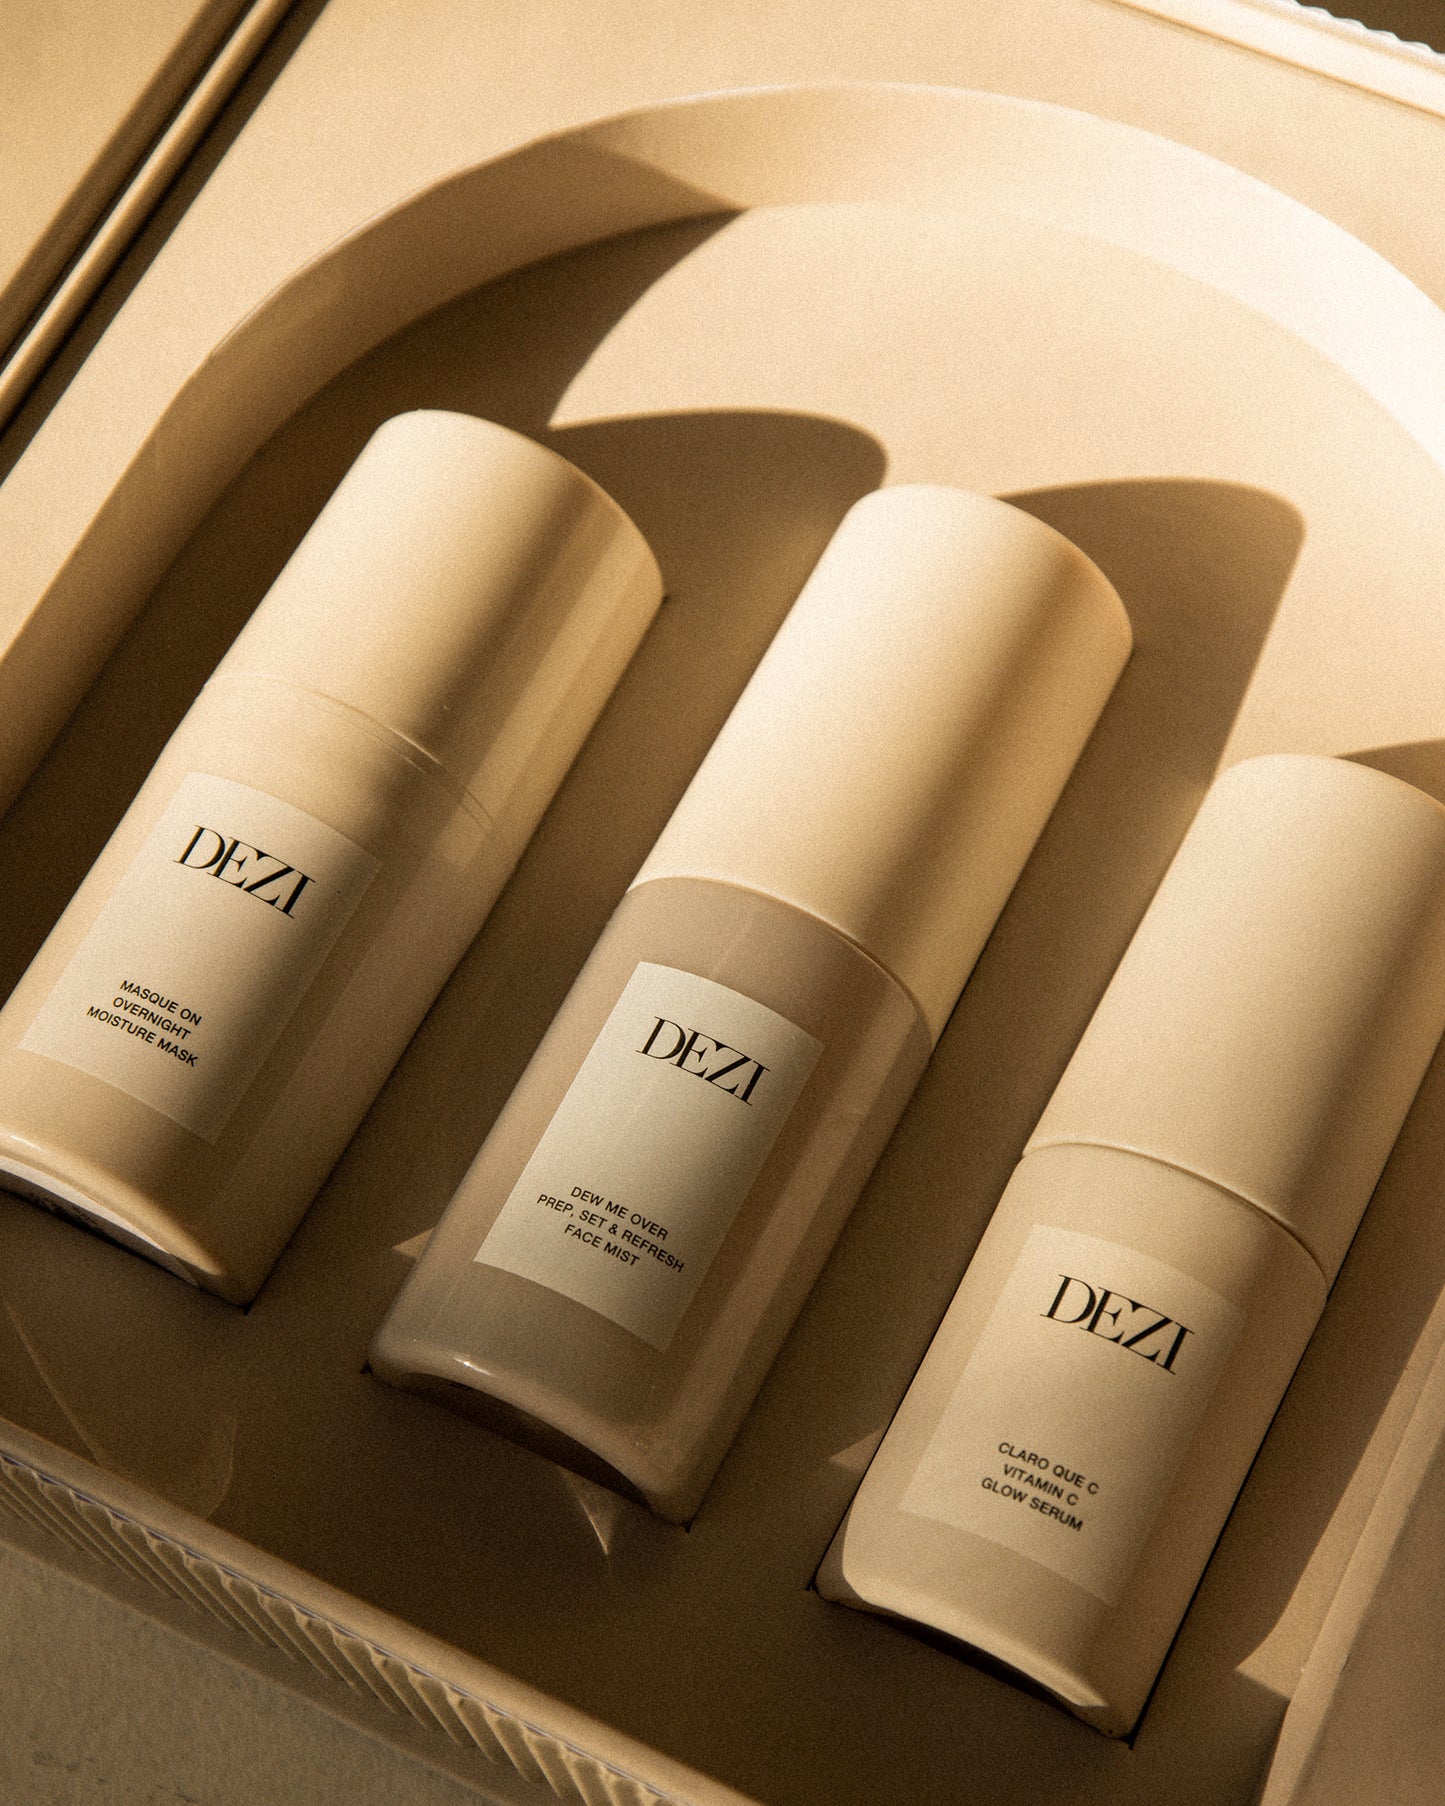 This shows three DEZI SKIN travel size products in the custom box. They are sitting in a tray that is shaped like an arch, inspired by architecture.